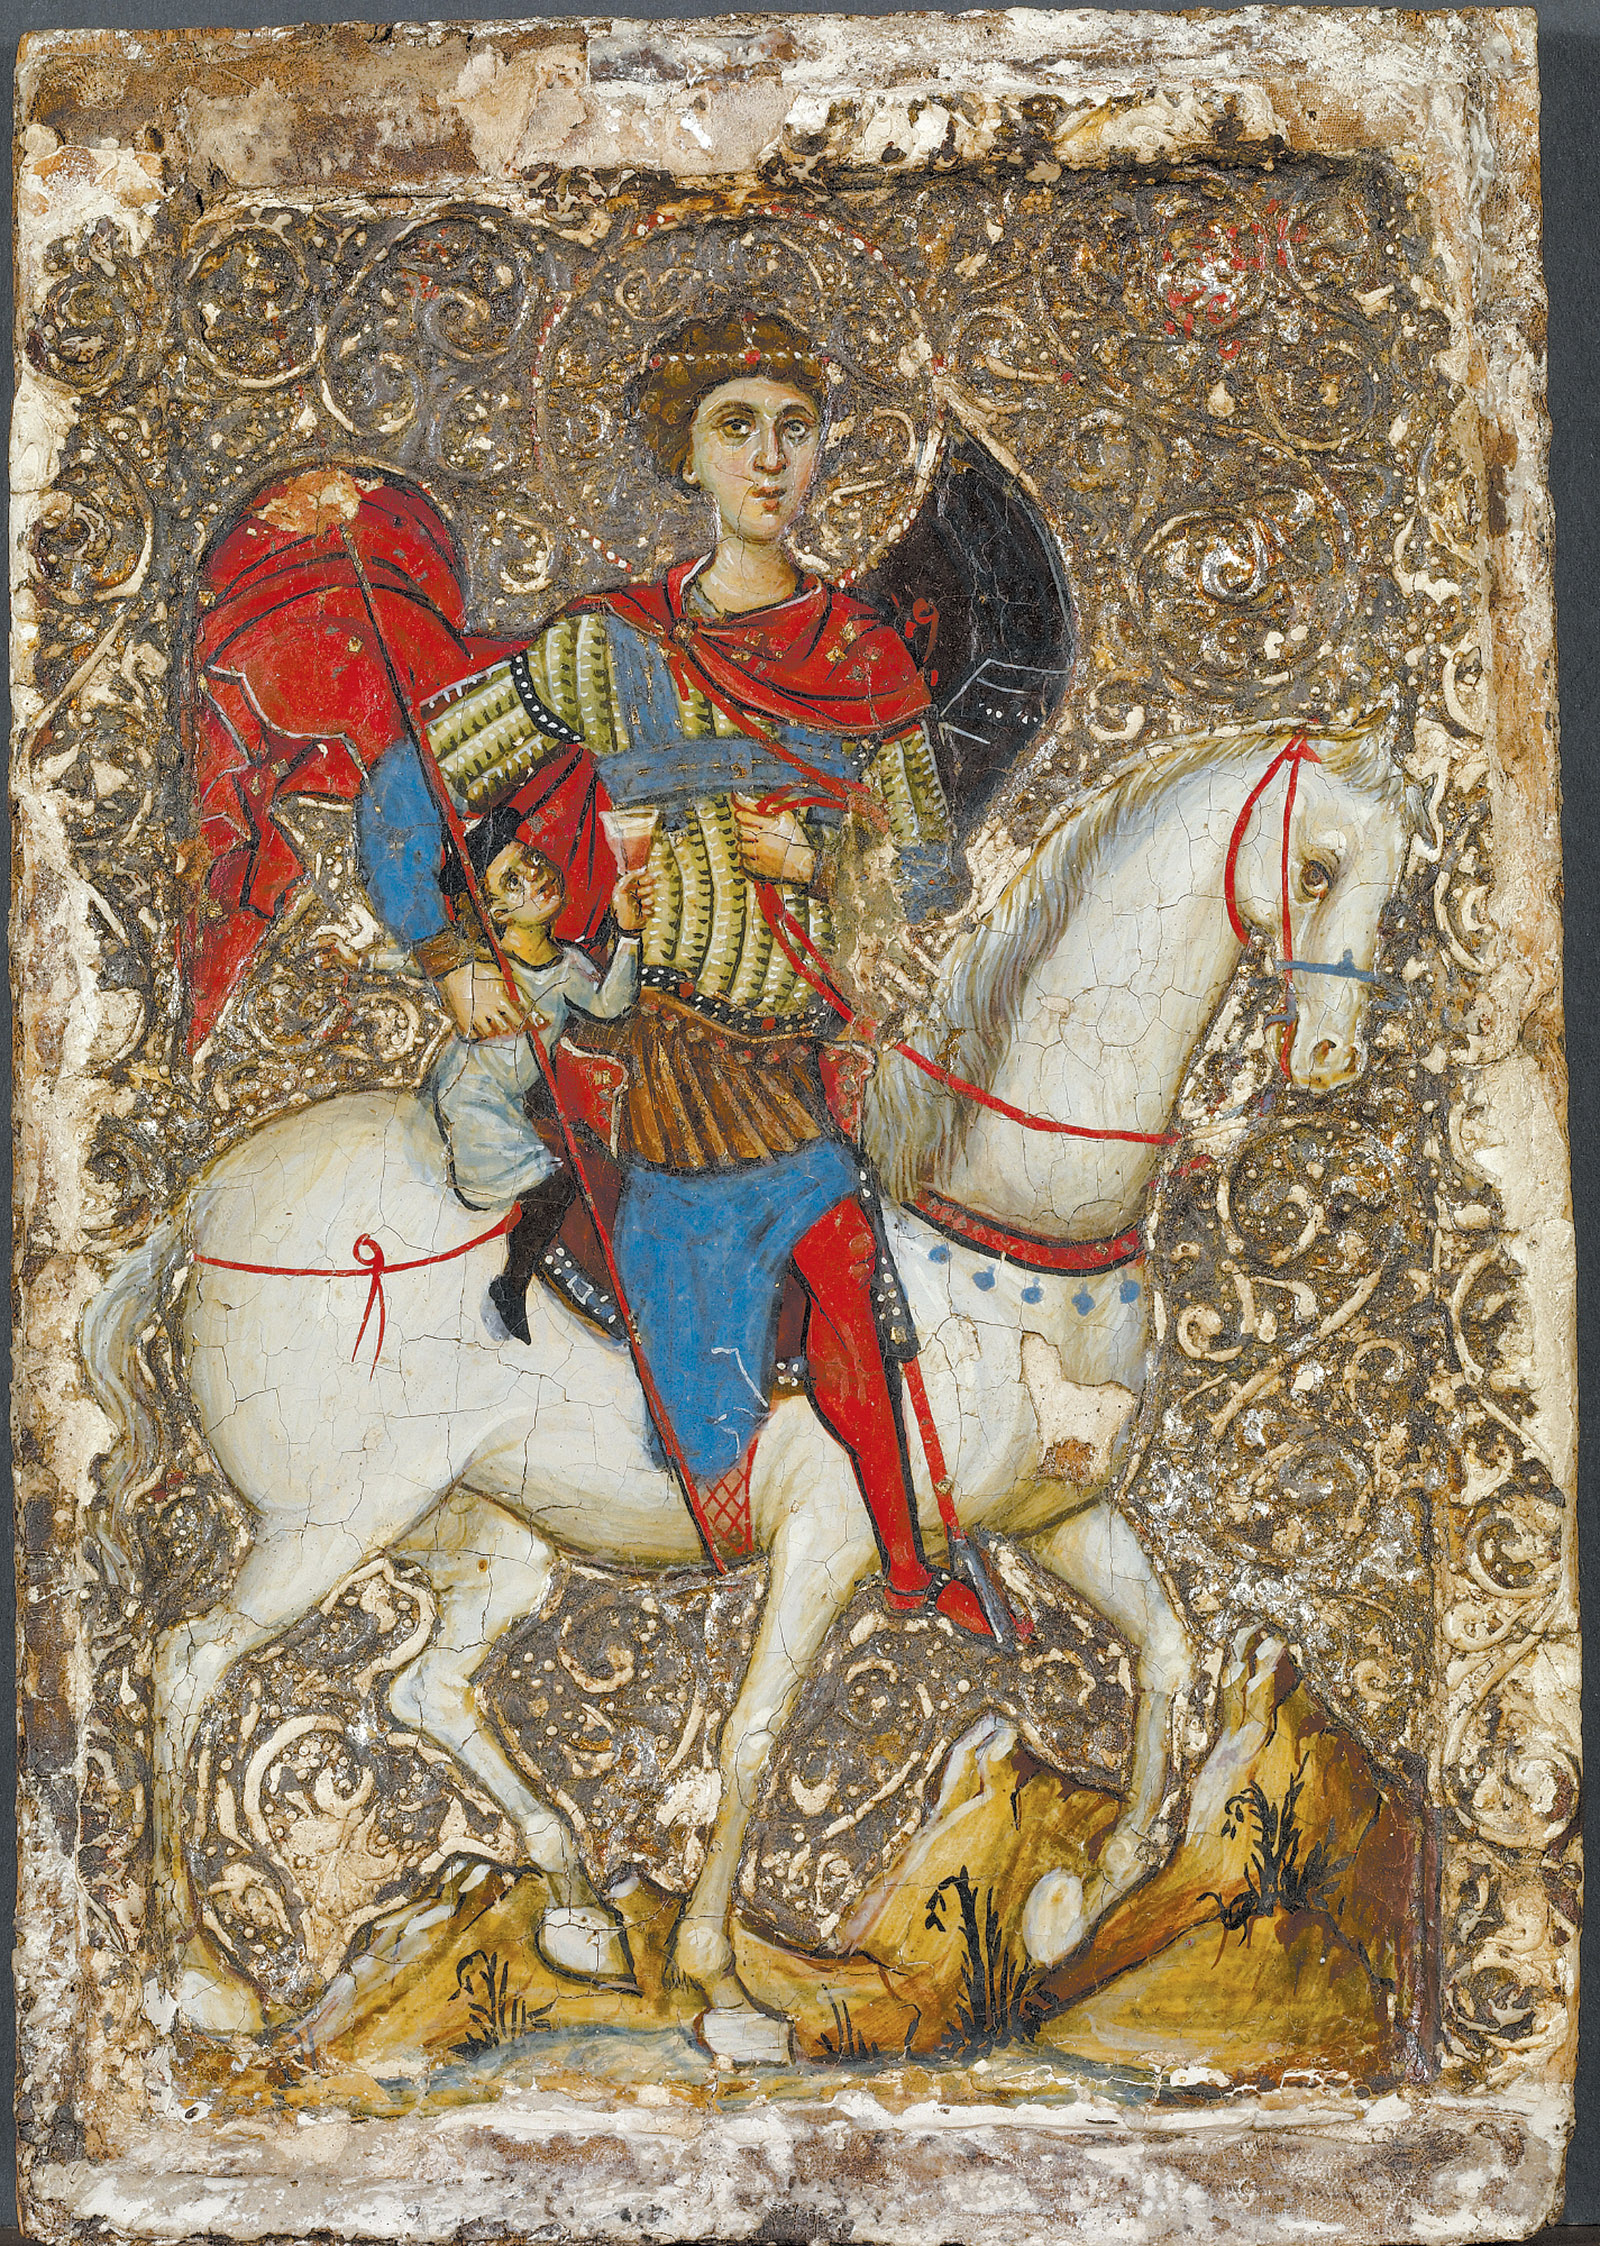 ‘Icon with Saint George and the Young Boy of Mytilene’; Holy Land, mid-thirteenth century. According to the ‘Jerusalem’ exhibition catalog, ‘The jug and wineglass held by the youth connect the image to a popular miracle account in which a boy captured by Saracens is made to serve as cupbearer for an amir and pressured to convert to Islam.’